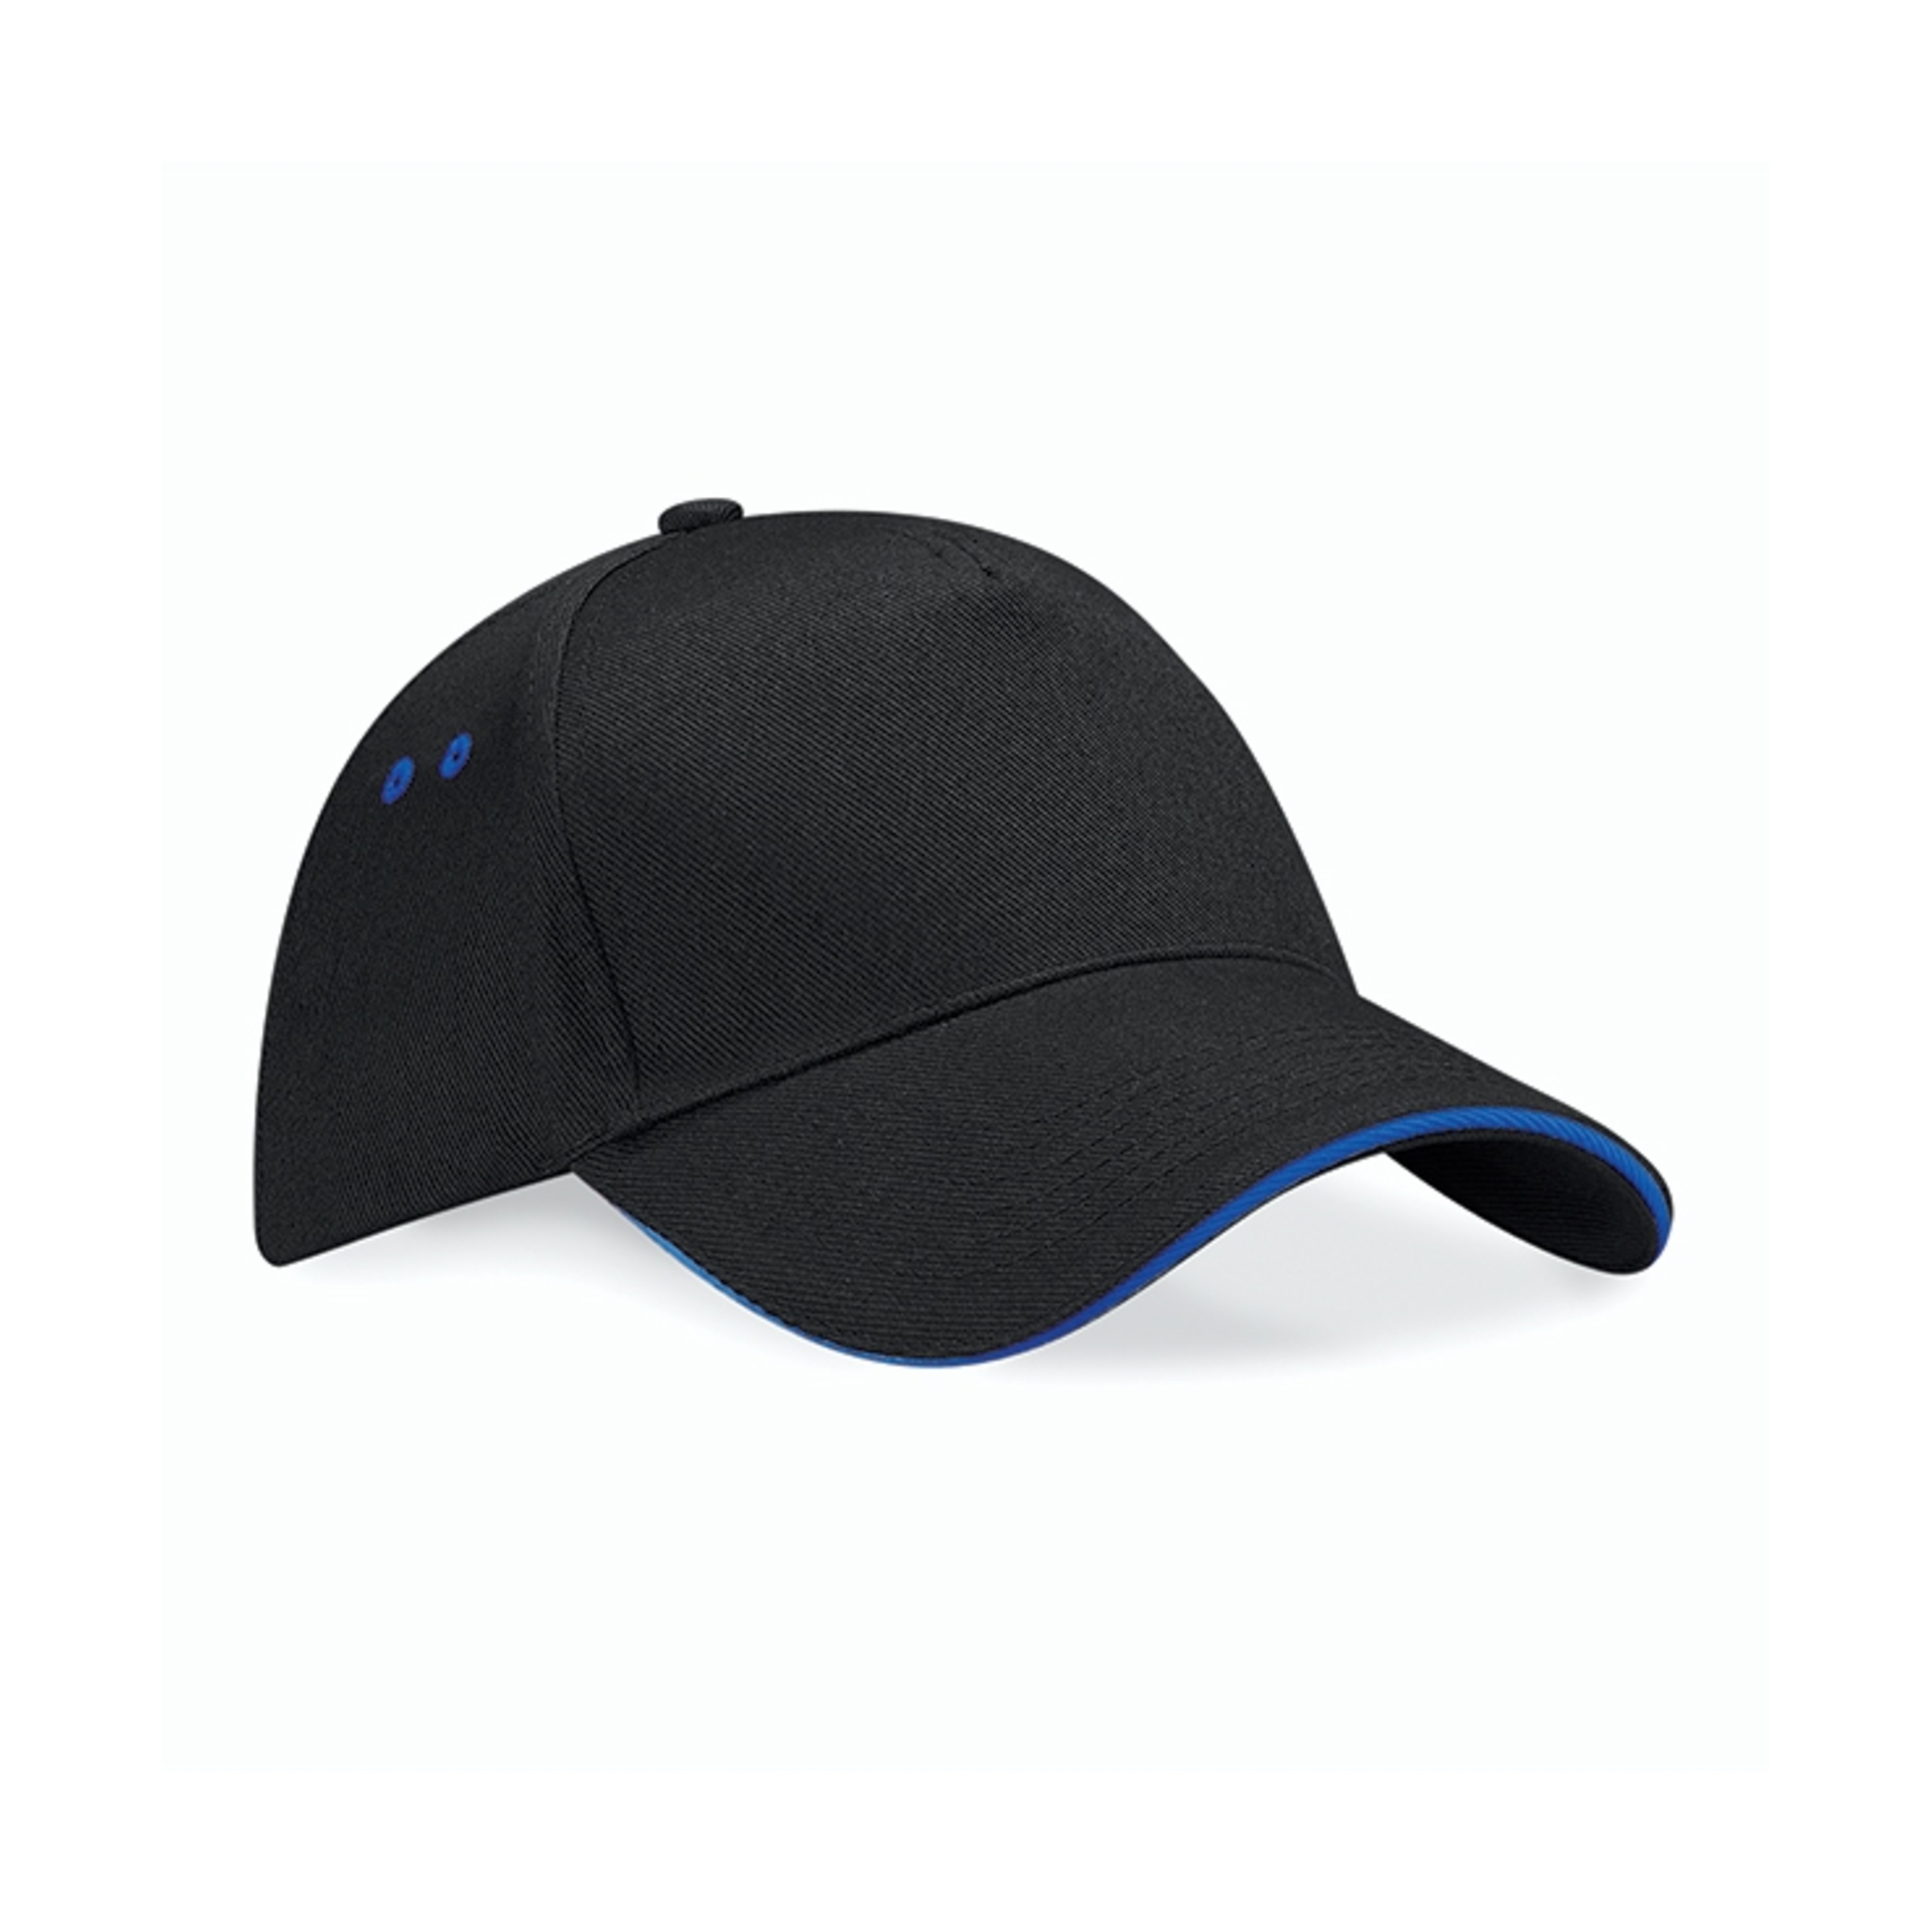 Beechfield Ultimate 5 Panel Cap - Black/Bright Royal - One Size